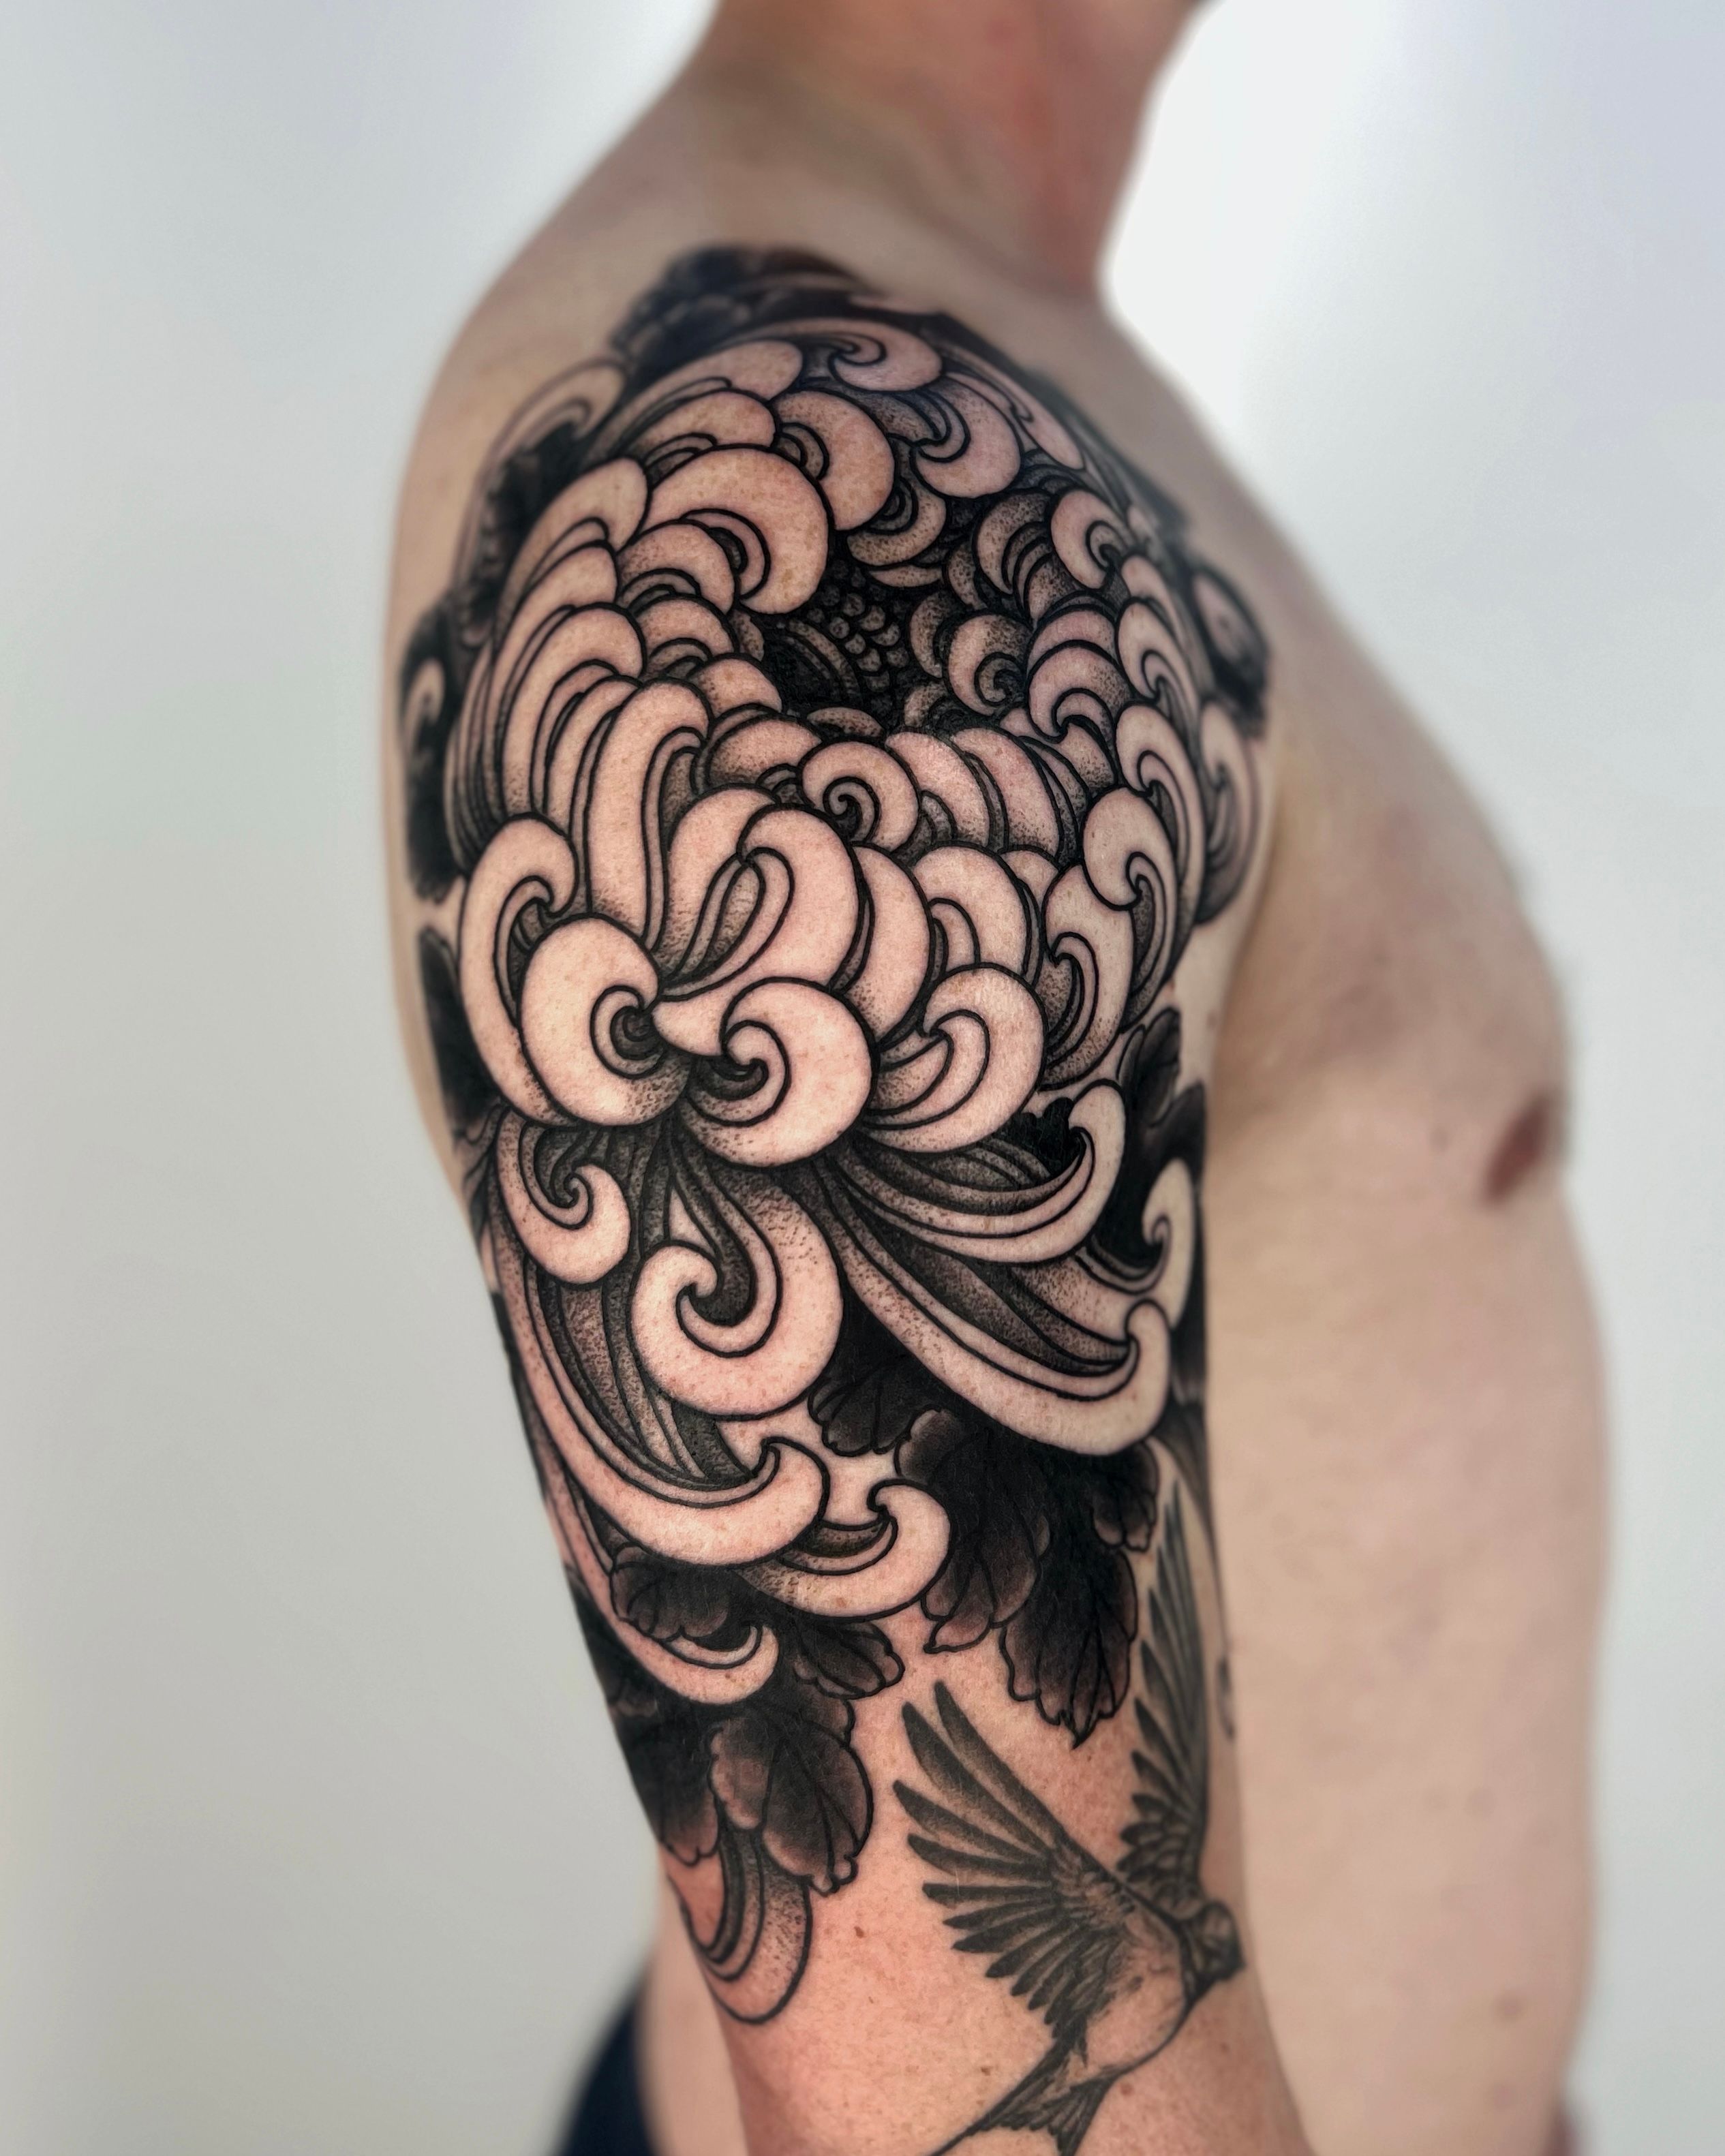 Black to Lines - Couple of weeks ago I finished a giant Chrysanthemum for  Madi @madisonxreese and she came back Yesterday for this small peony on the  other side 😆, I really